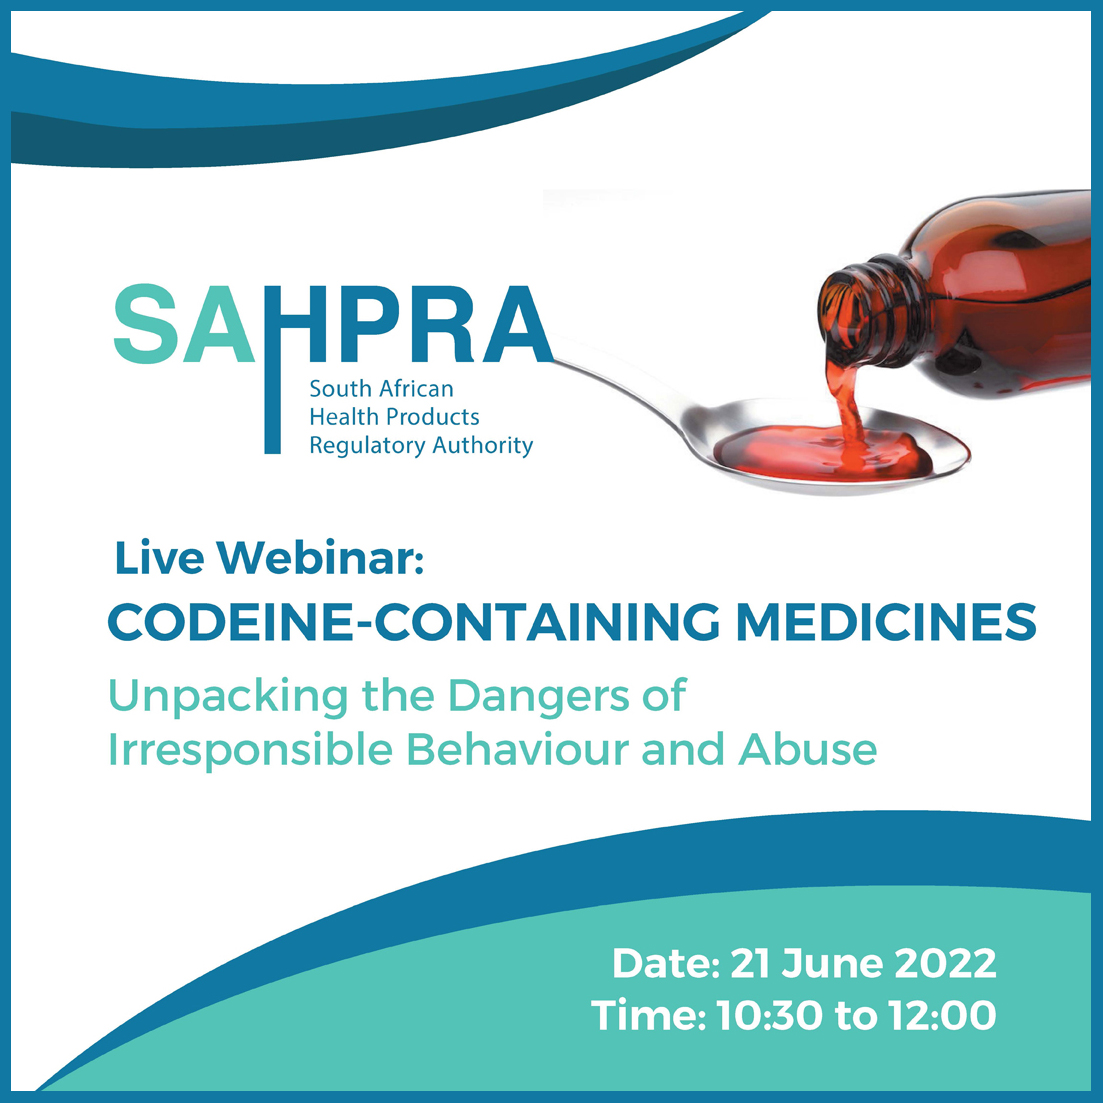 You’re invited to our LIVE Webinar: Codeine-Containing Medicines – Unpacking the Dangers of Irresponsible Behaviour and Abuse. 
Register now: bit.ly/3xz8sxb
#SAHPRA #webinar #codeine #drugabuse